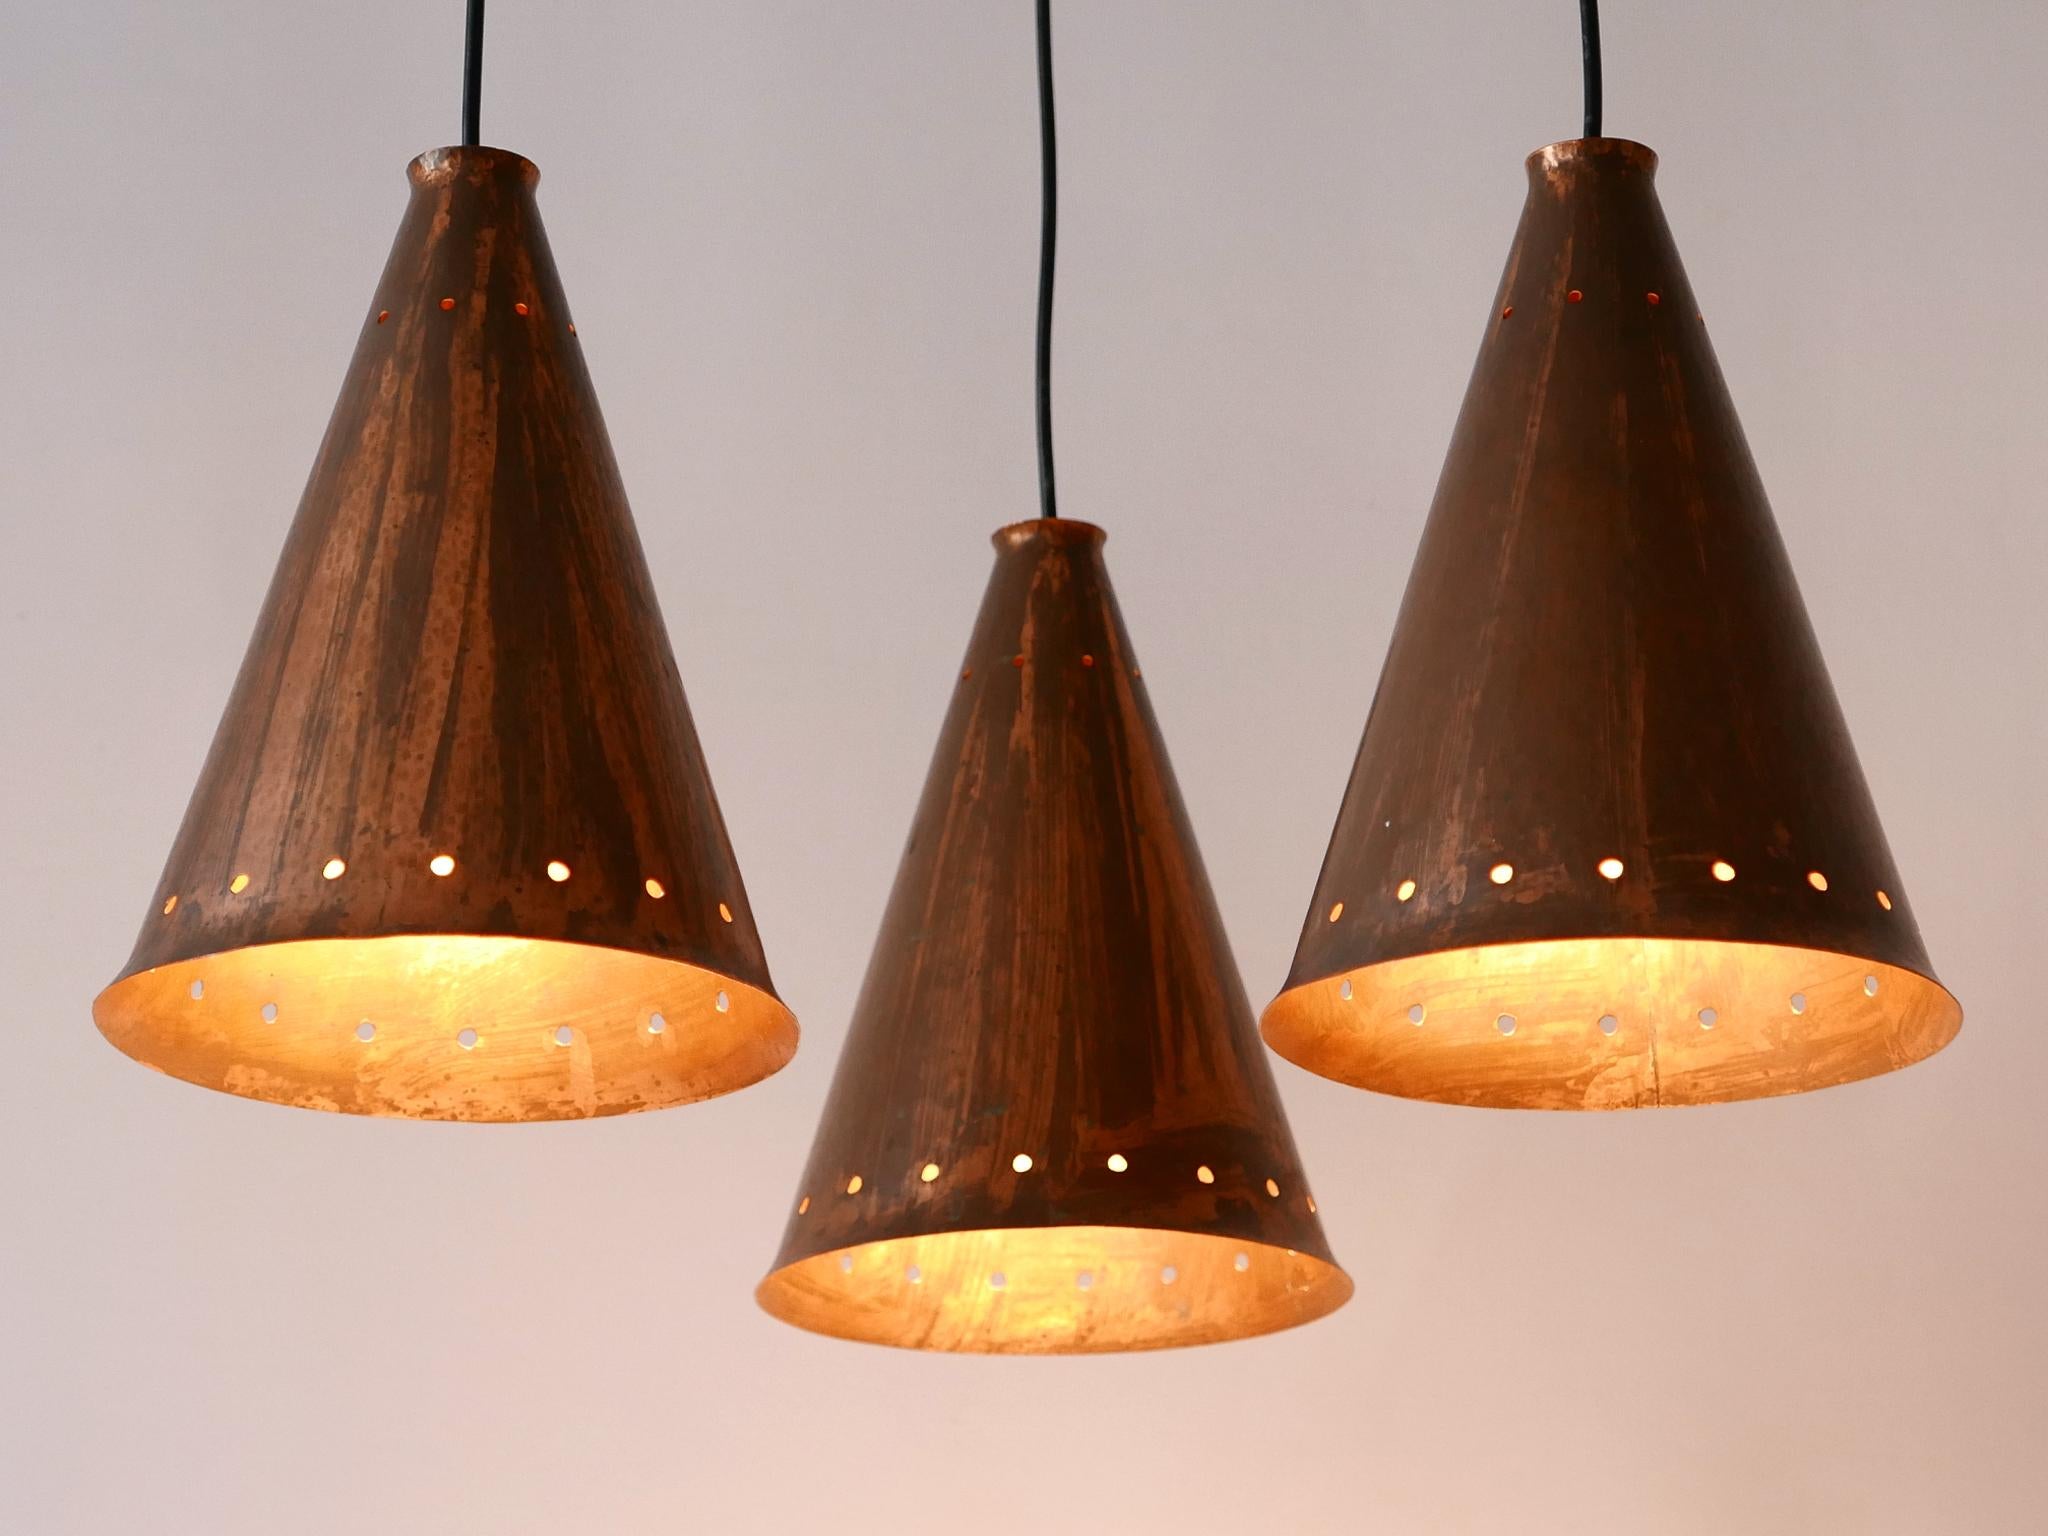 Exceptional & Large Mid-Century Modern Copper Pendant Lamp Scandinavia, 1950s For Sale 7